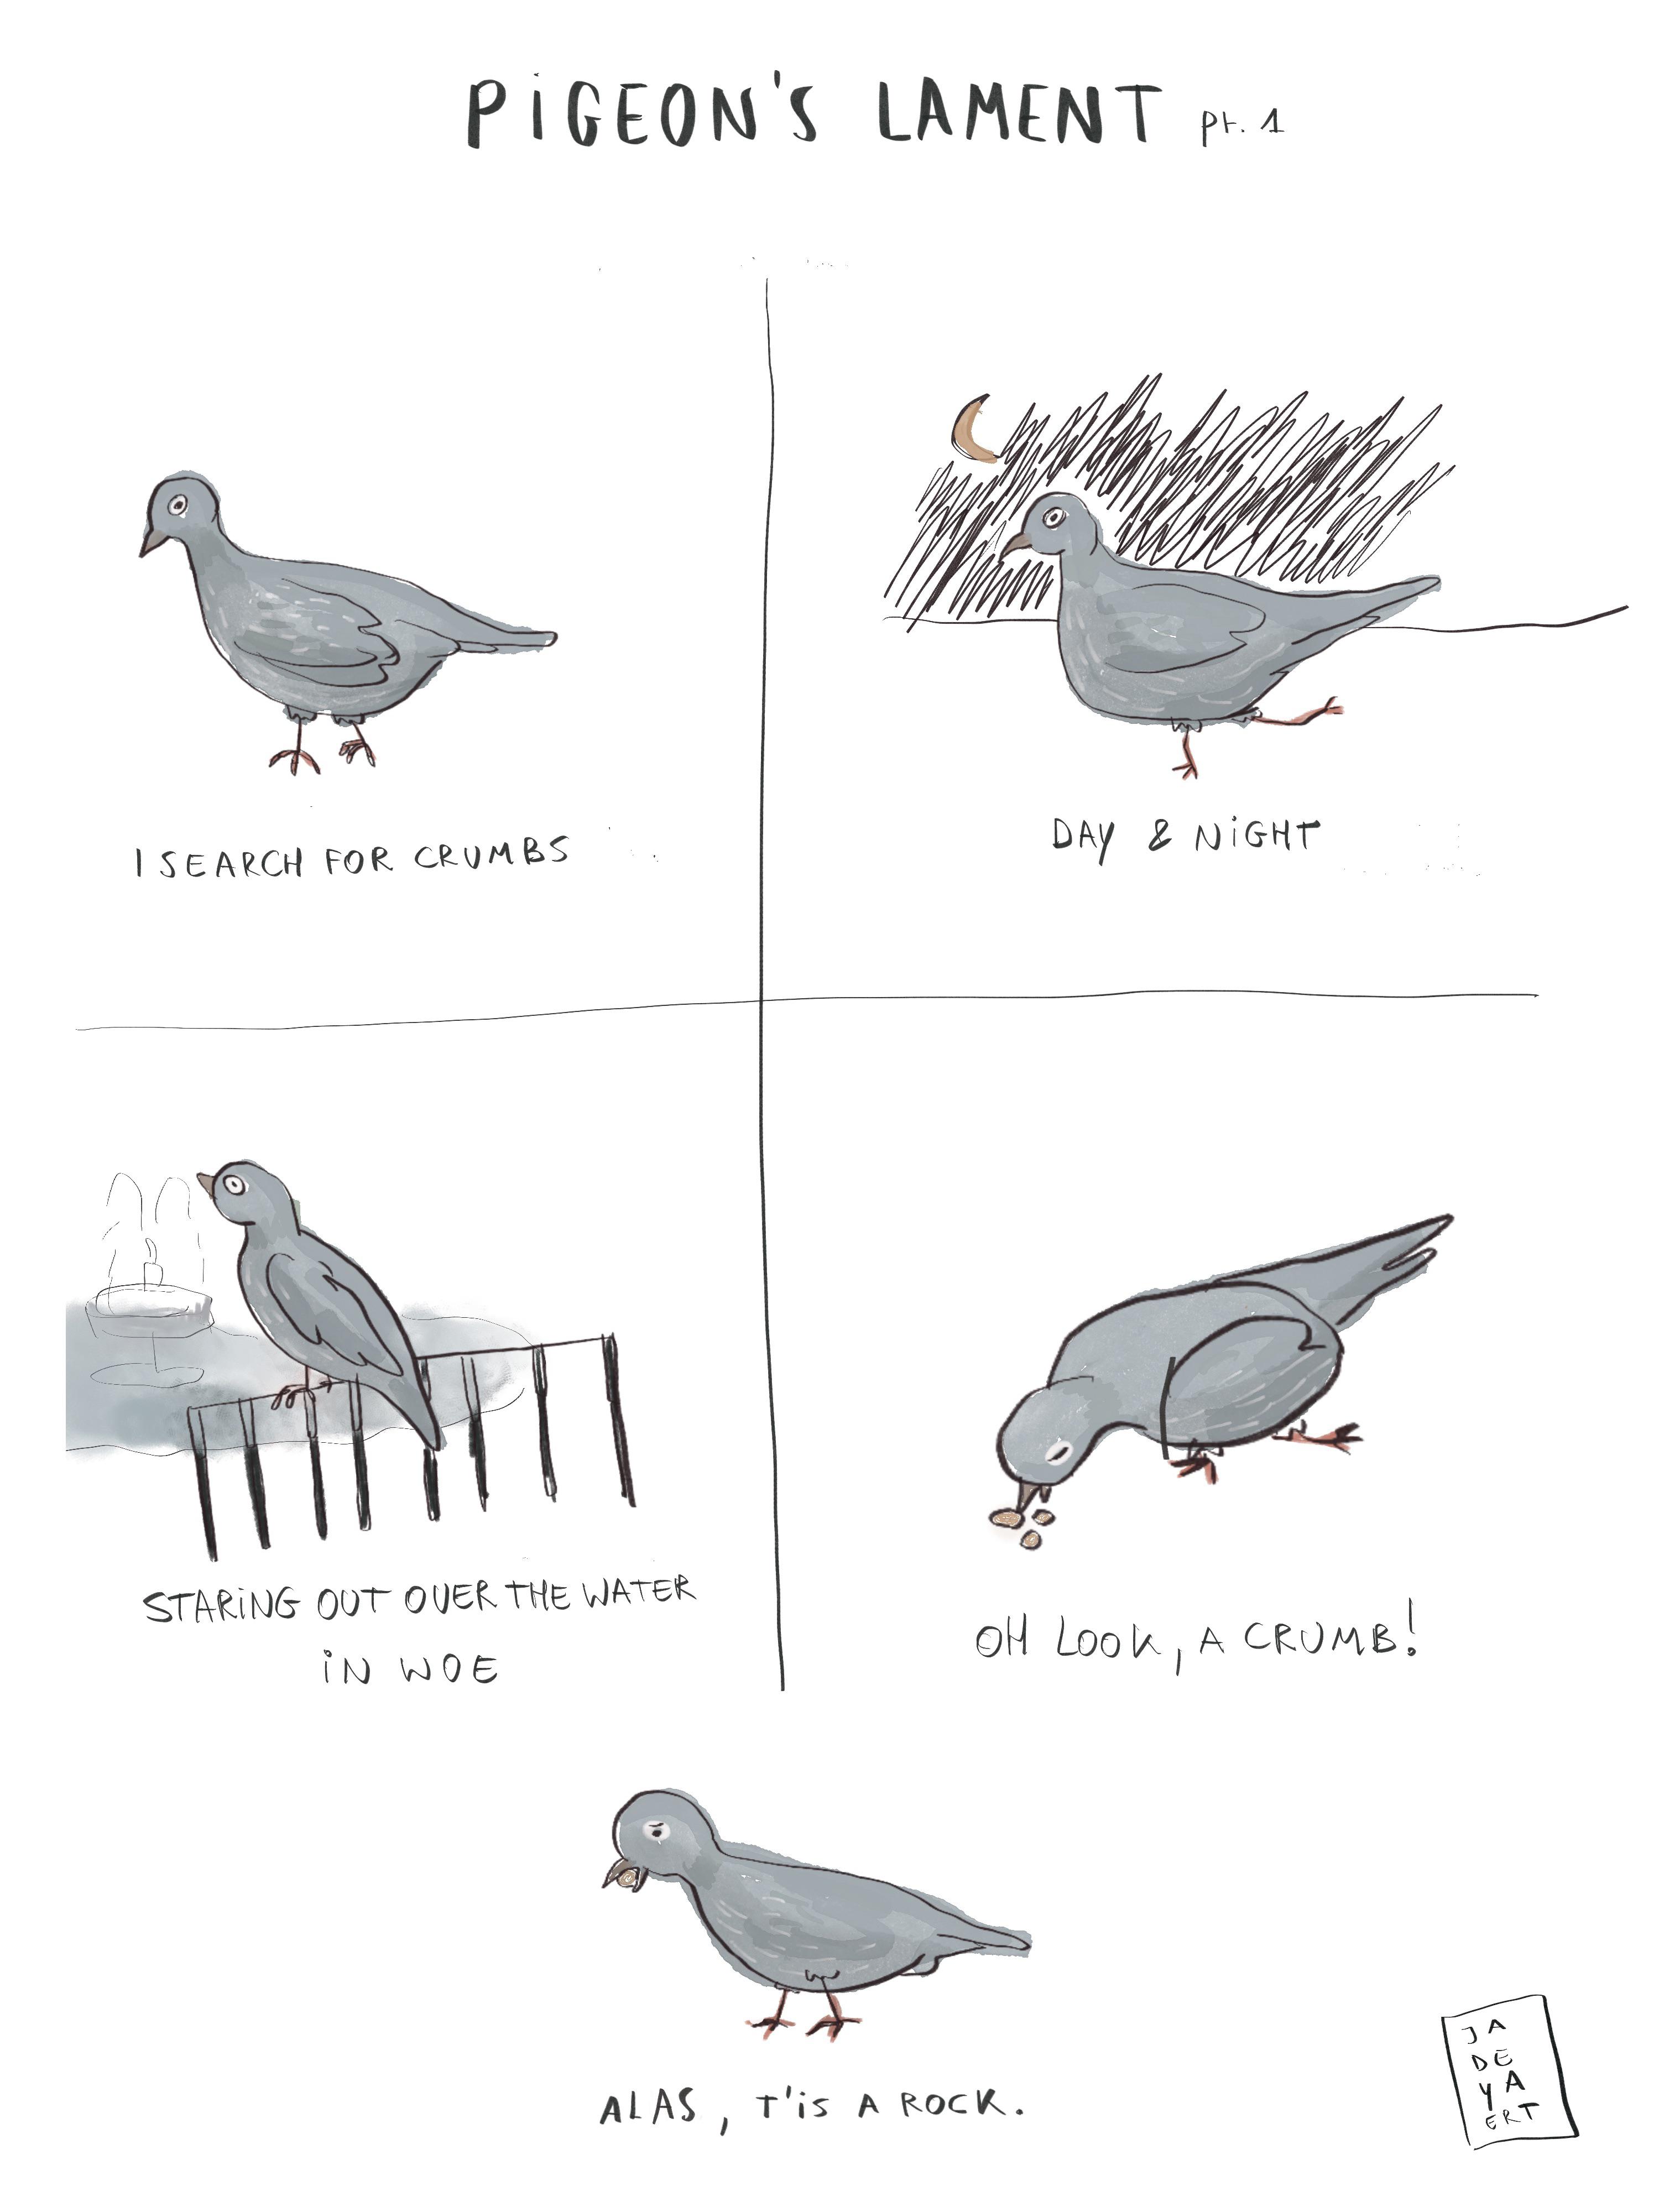 The pigeon's lament. 